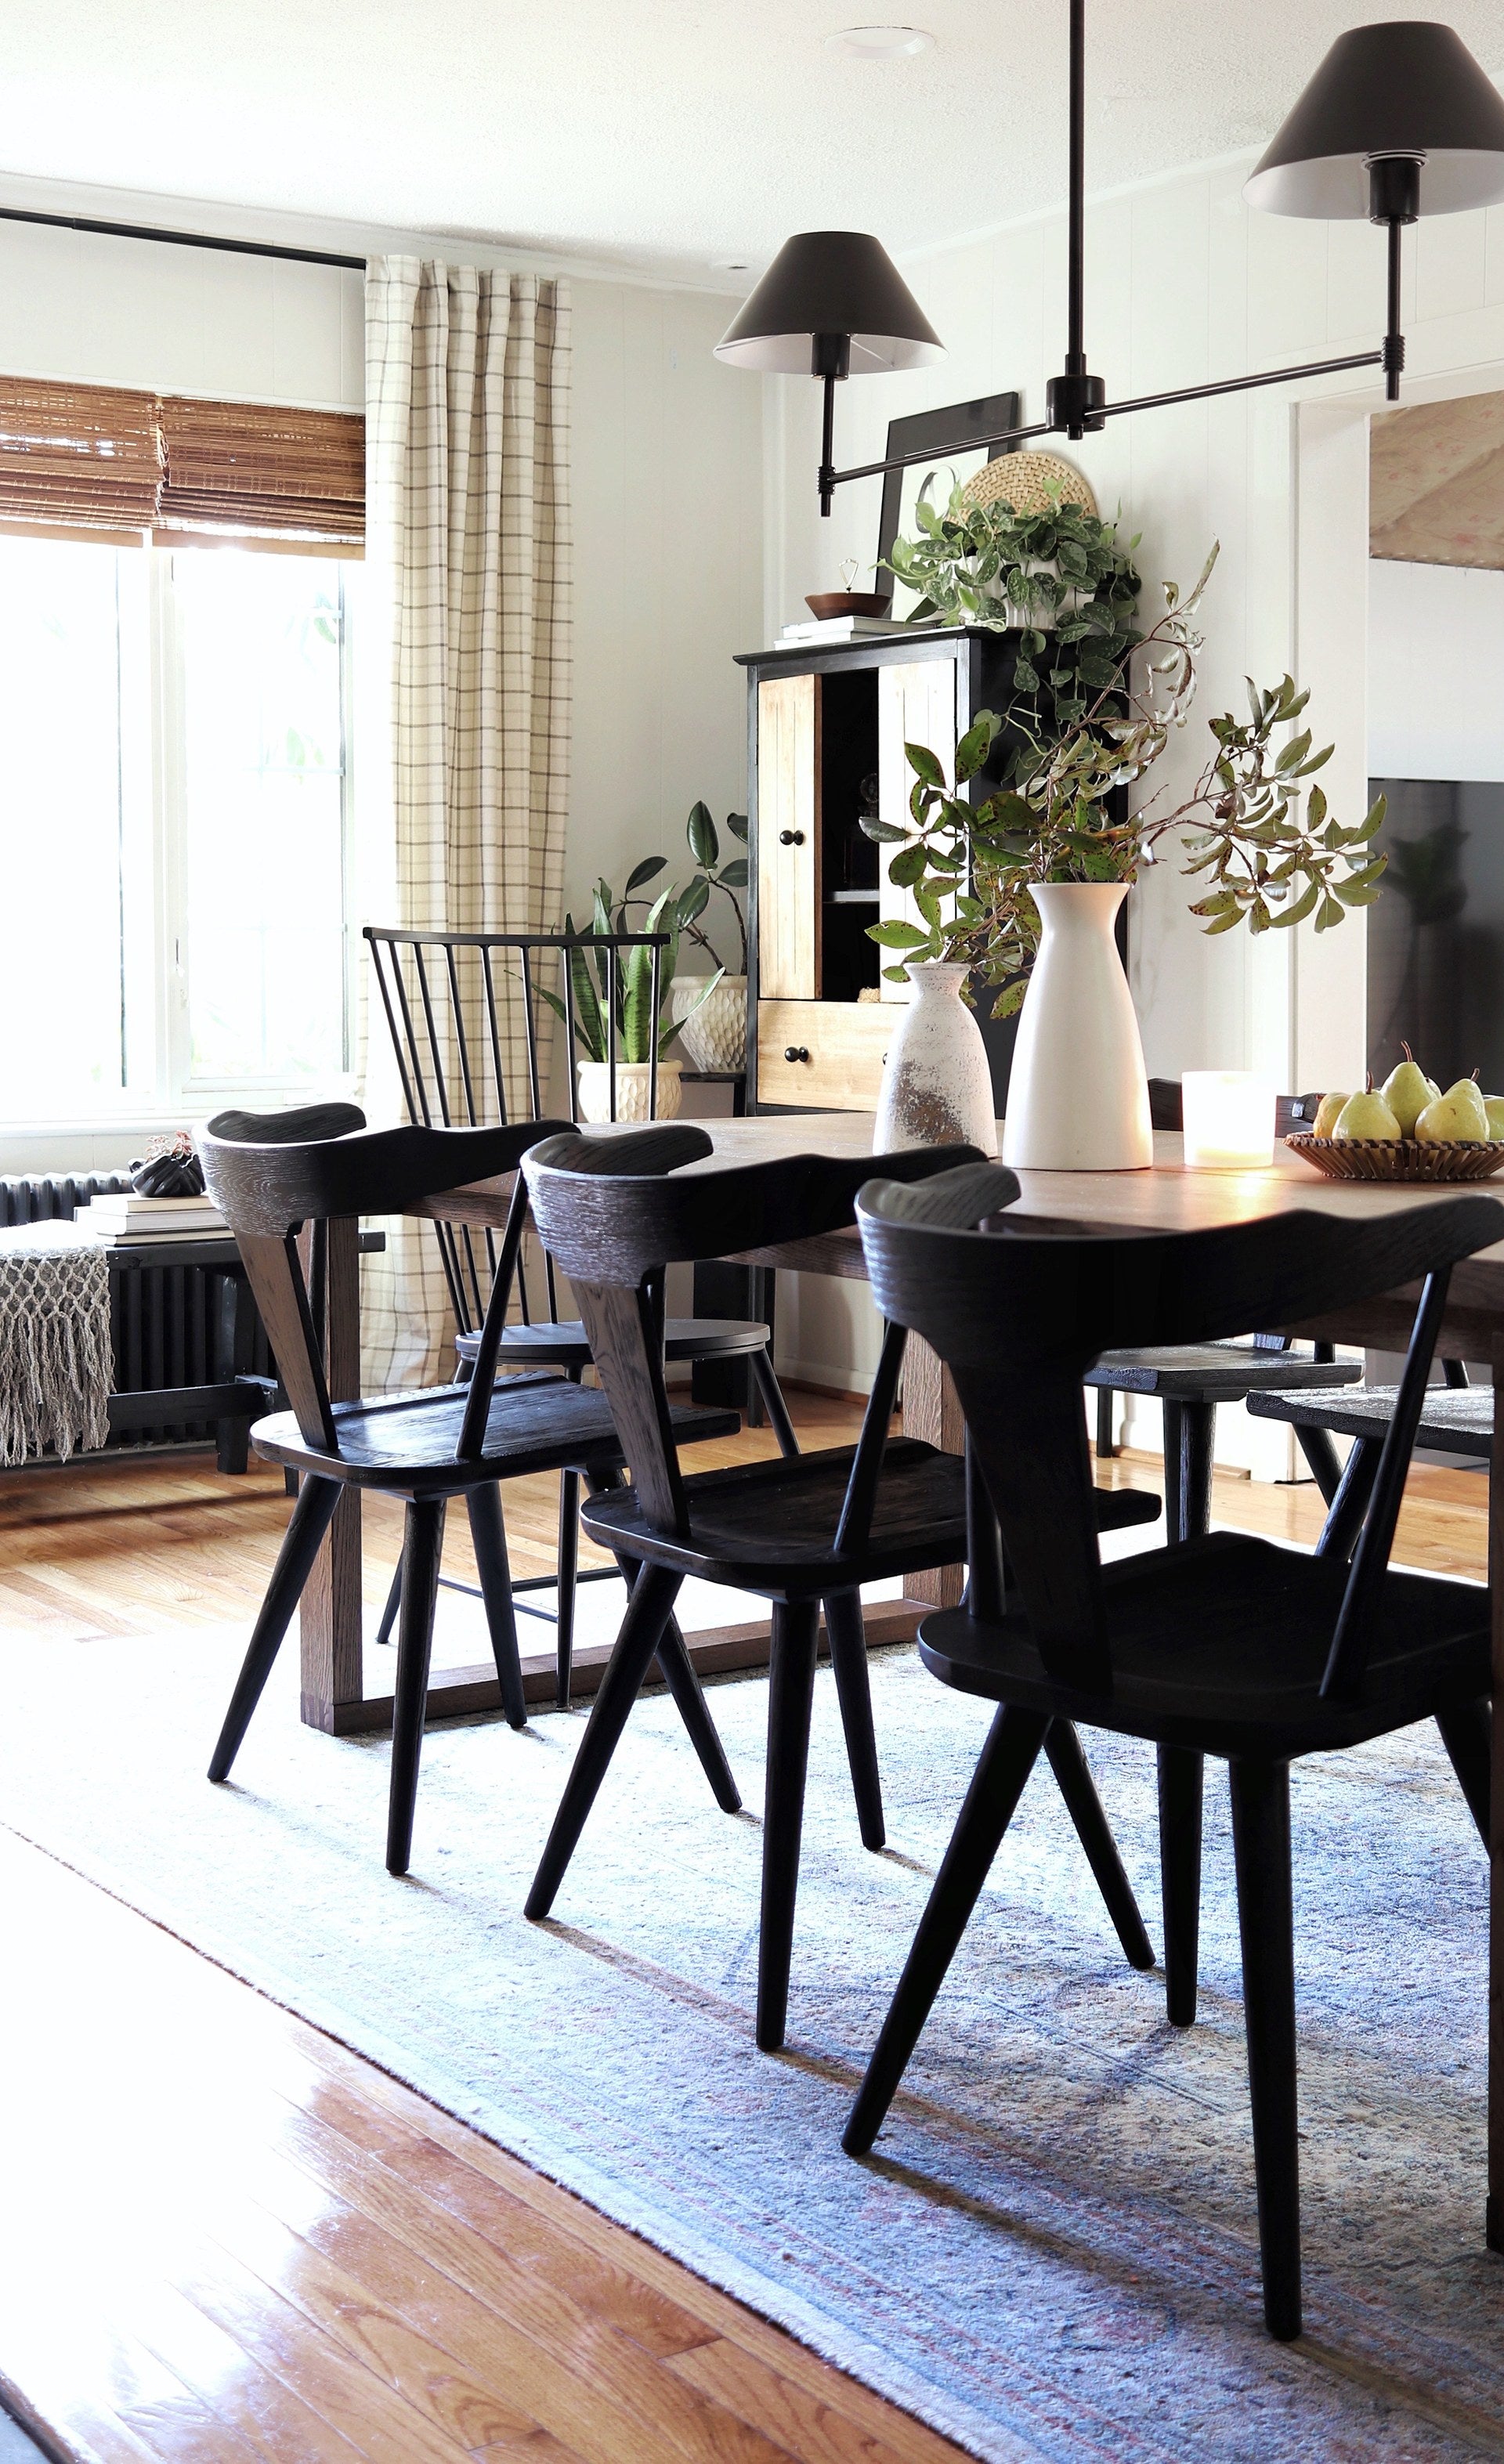 Black wooden dining chairs surround a wooden rectangular dining table. Two tall white rustic vases hold tree clippings and a basket of pears sits next to them.